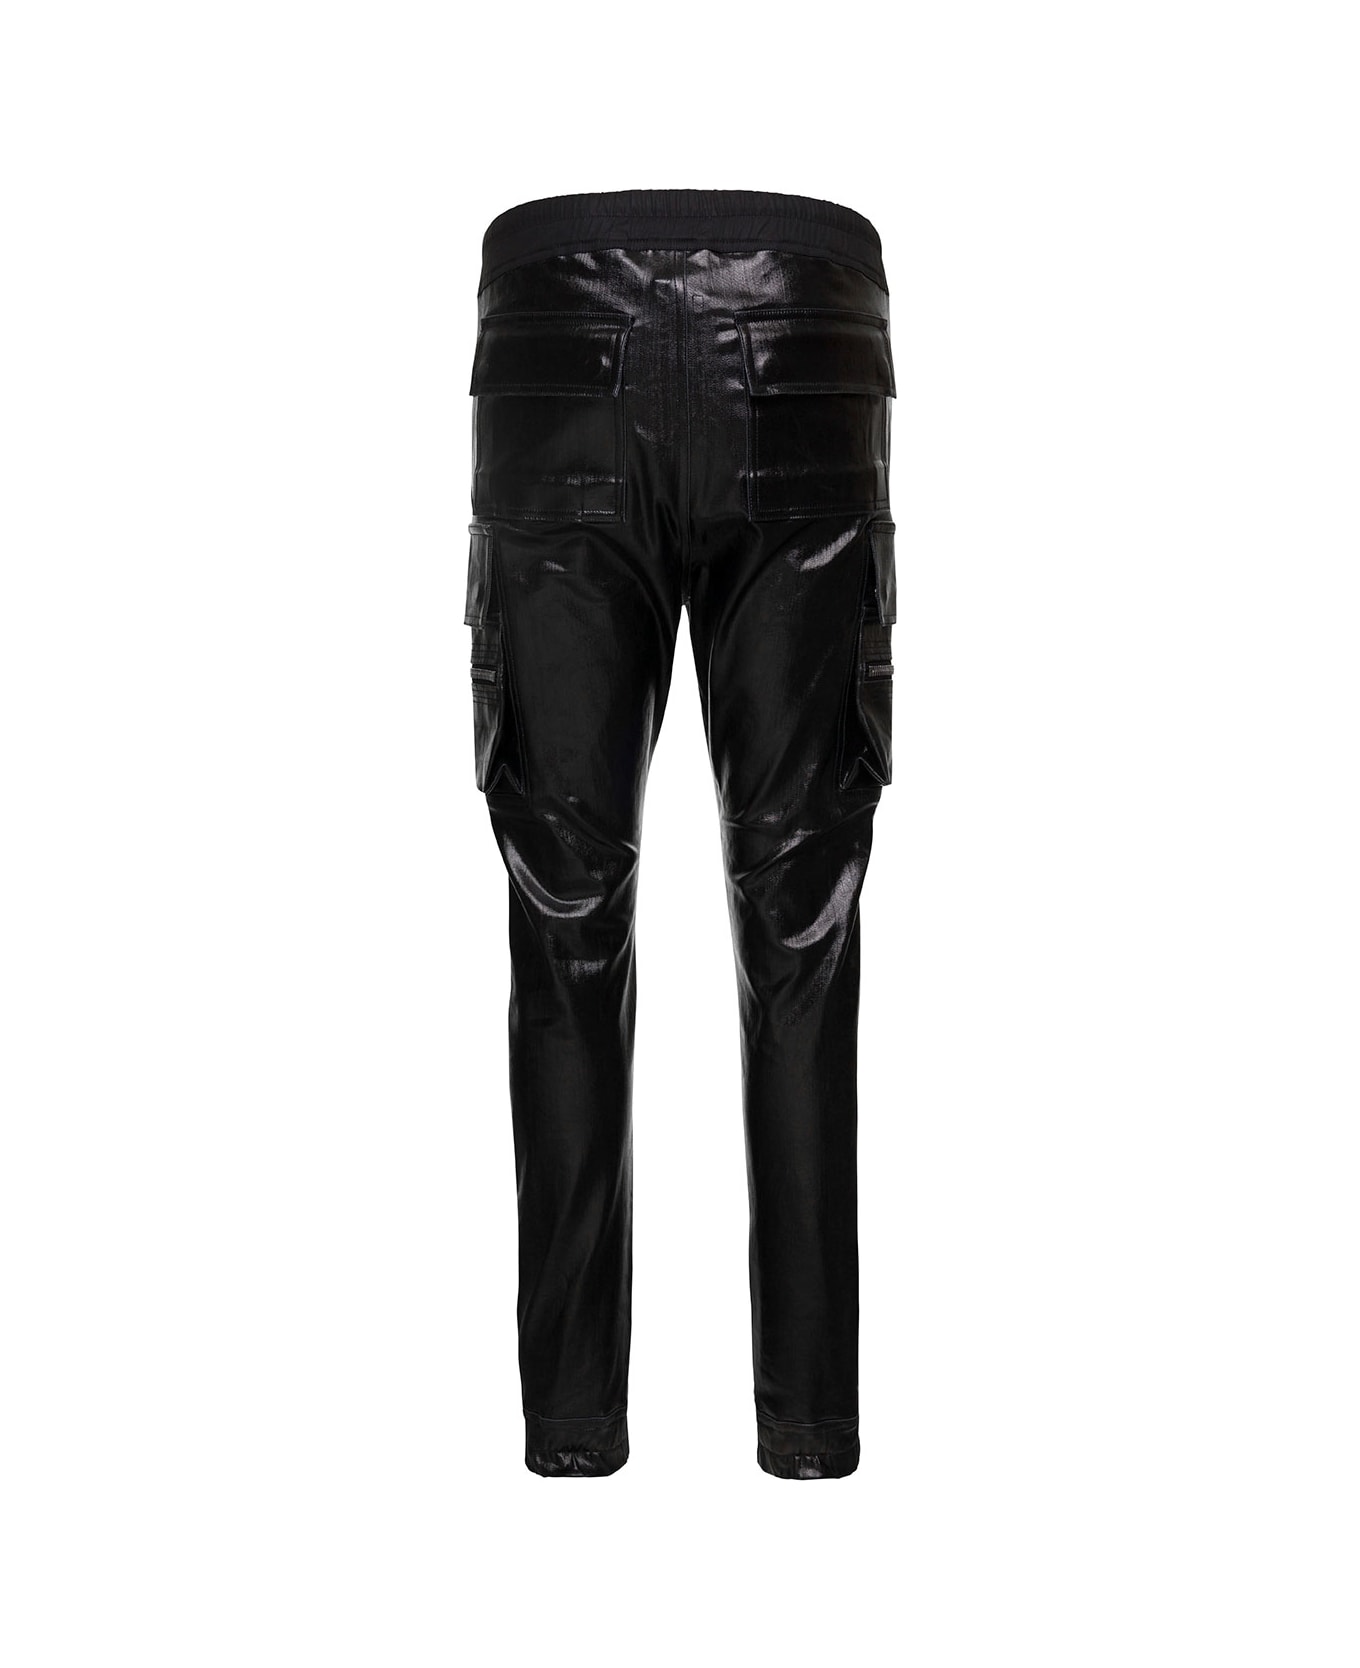 Rick Owens Black Cargo Pants Laquered Denim In Cotton Stretch Woman - Black ボトムス